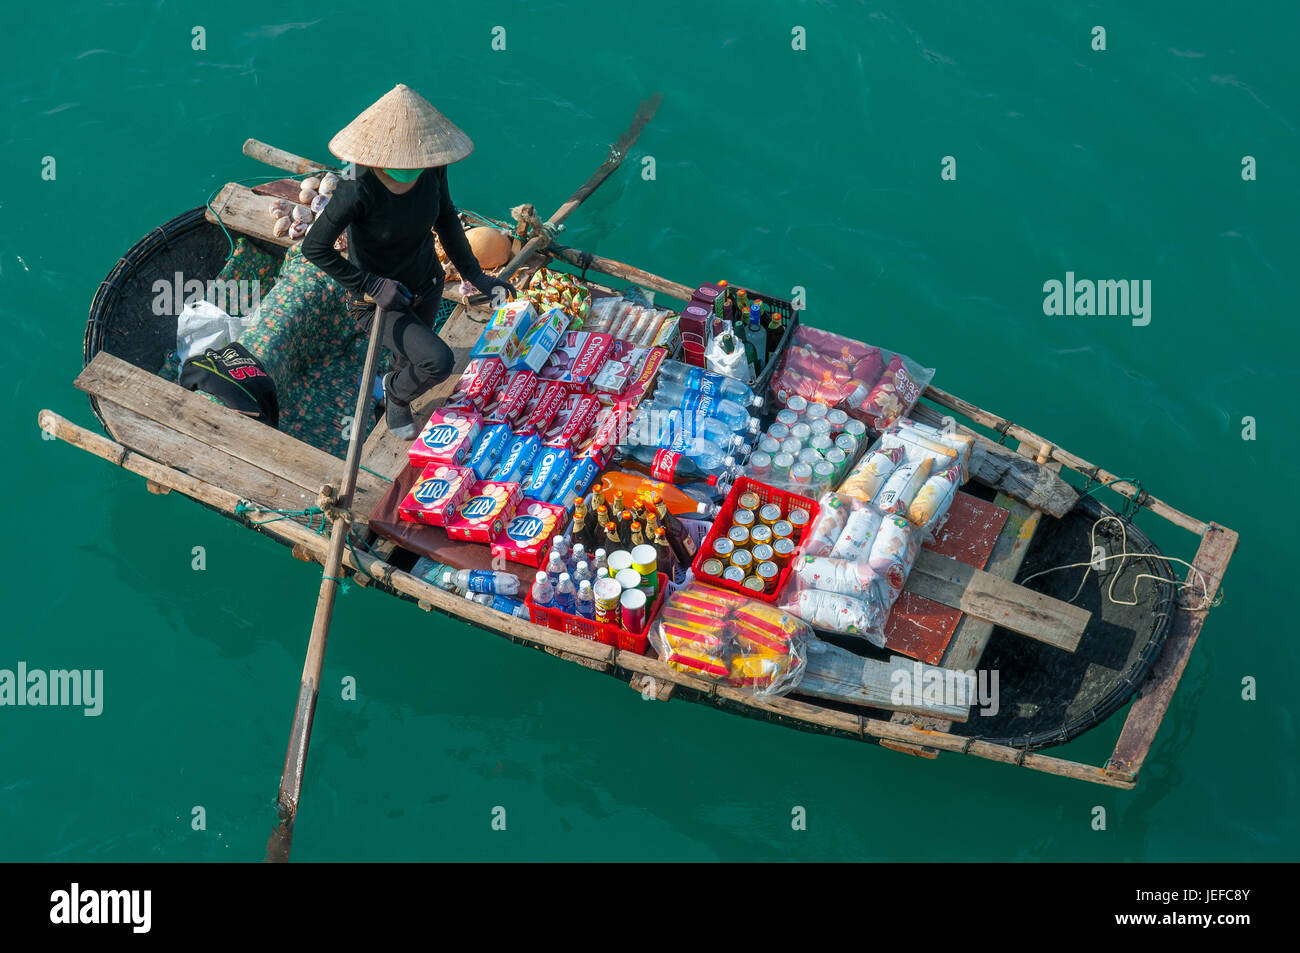 A saleswoman with conical hat in a traditional boat in the emerald waters of Halong Bay selling products to tourist boats, Haiphong, Vietnam. Stock Photo